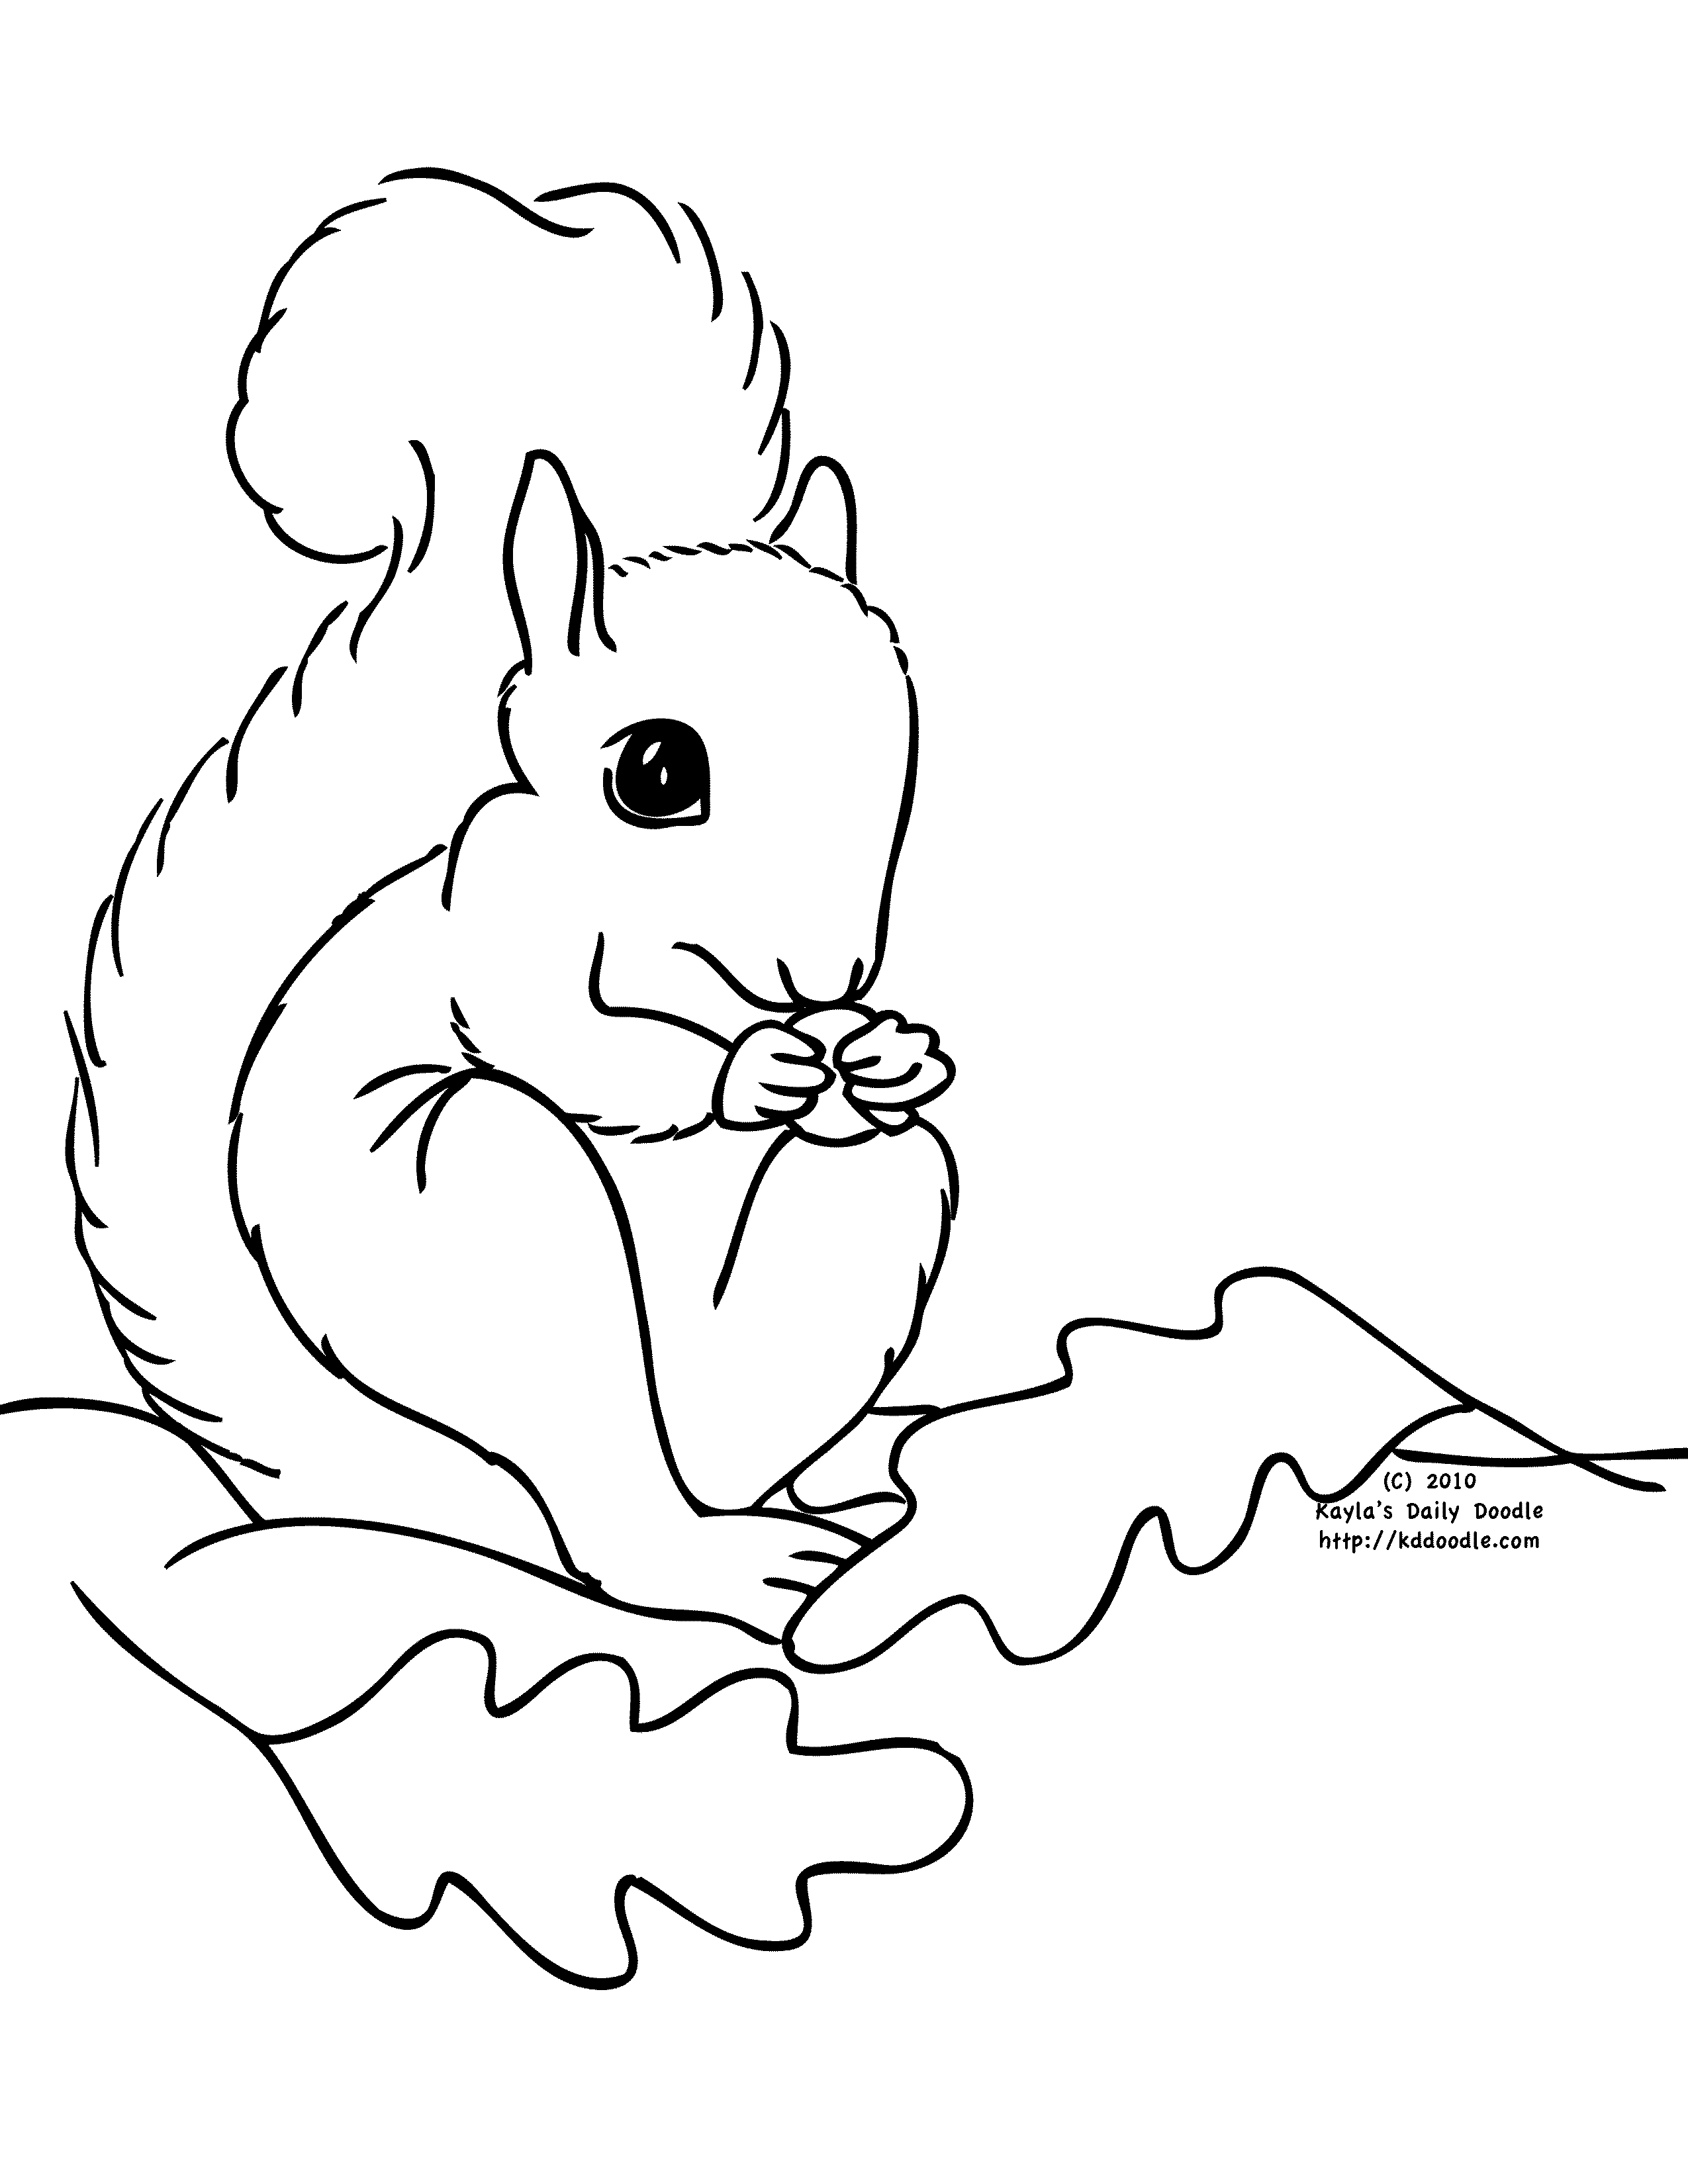 squirrel coloring page squirrel coloring pages to download and print for free coloring squirrel page 